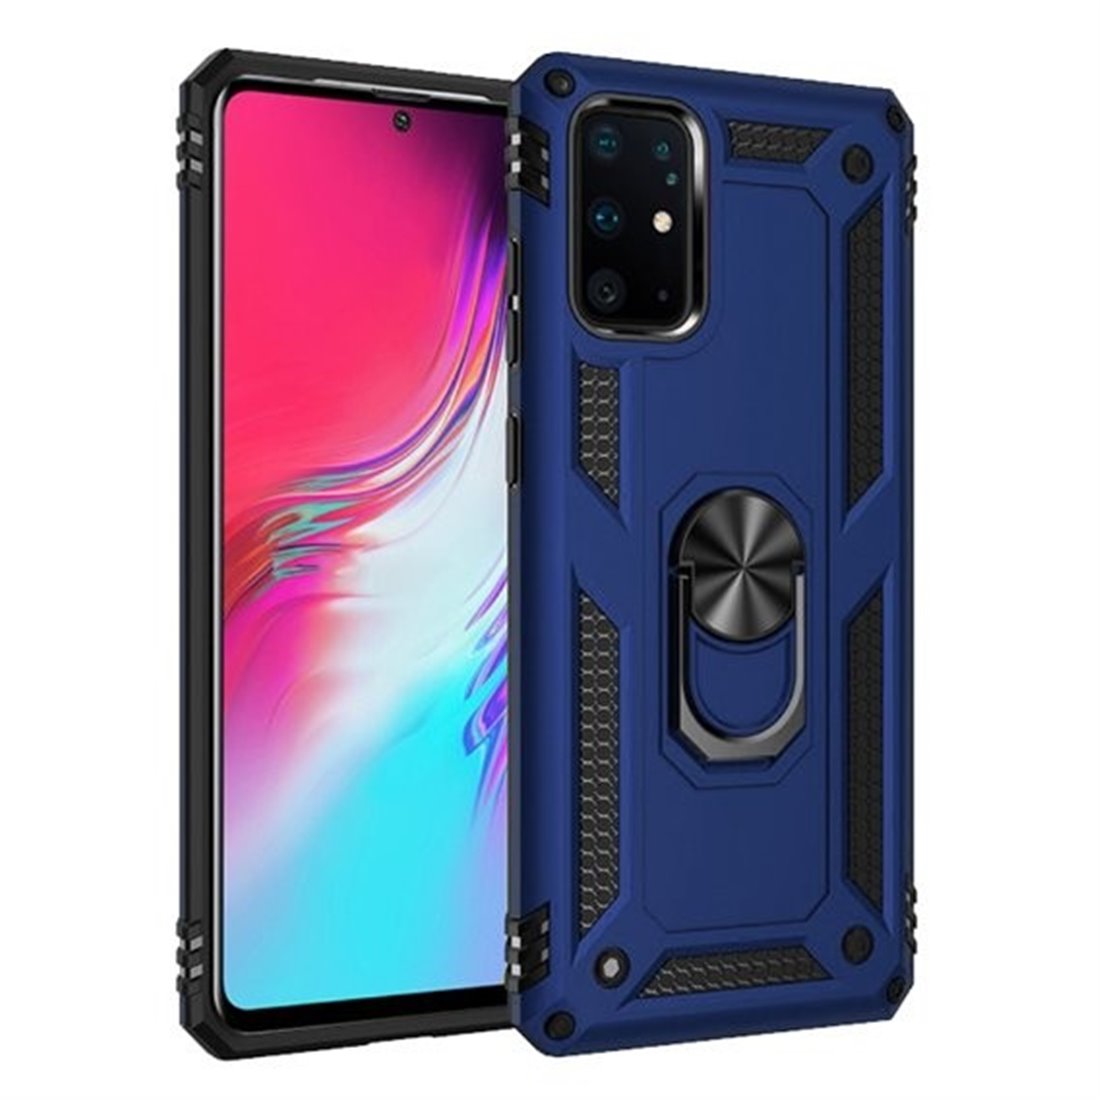 Huawei Huawei P 40 Plastic Blue Back Cover - Solid ring